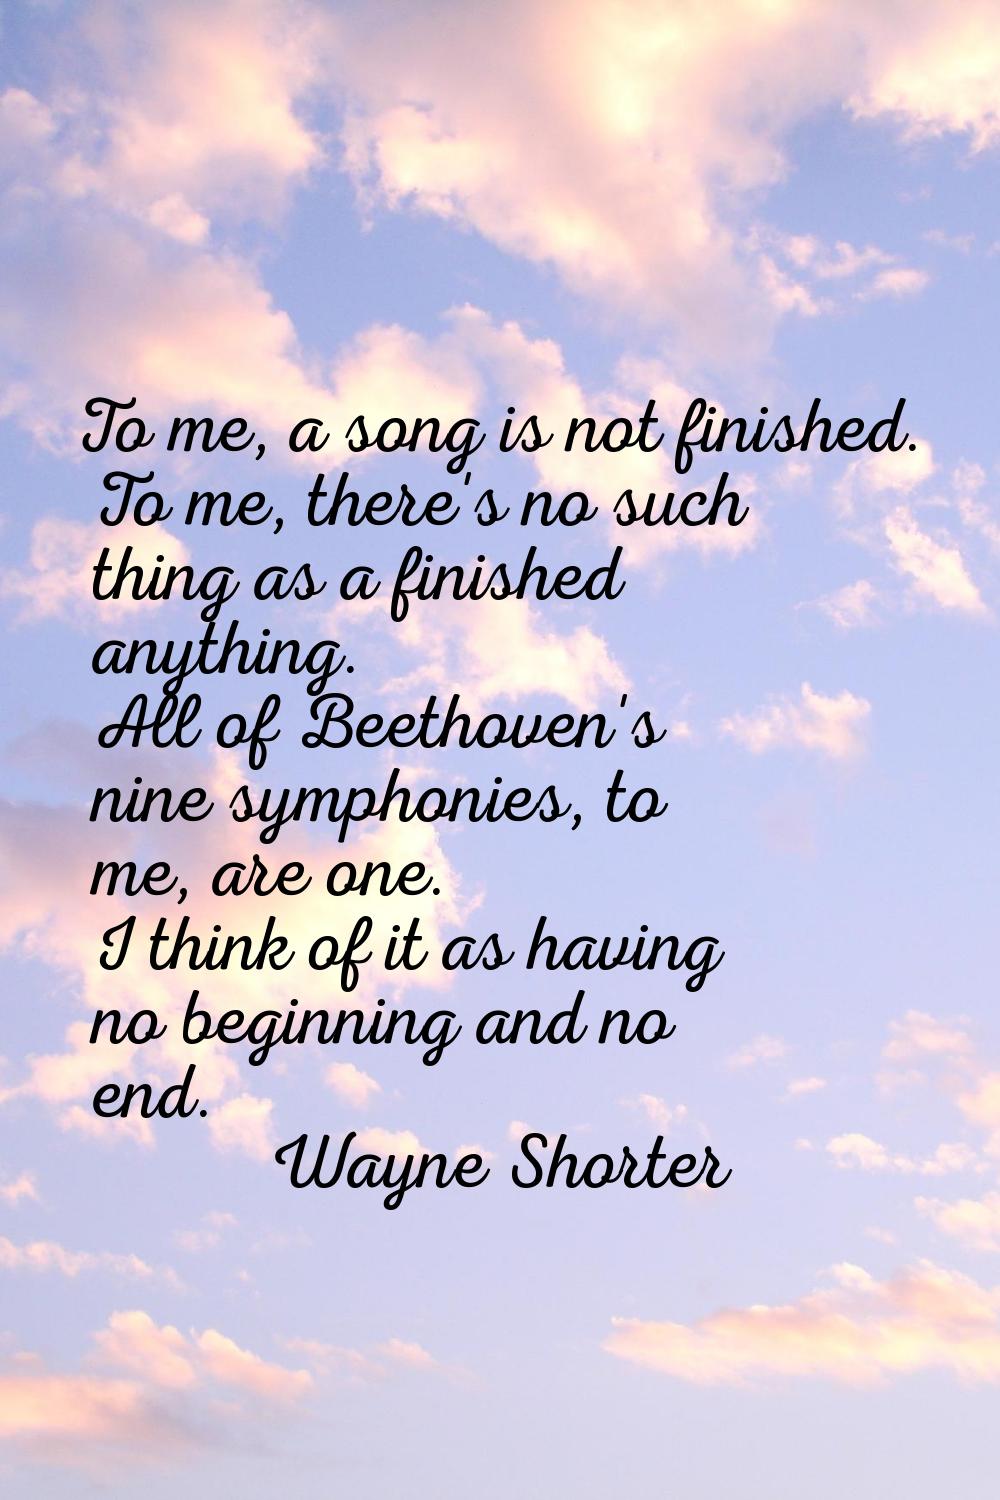 To me, a song is not finished. To me, there's no such thing as a finished anything. All of Beethove